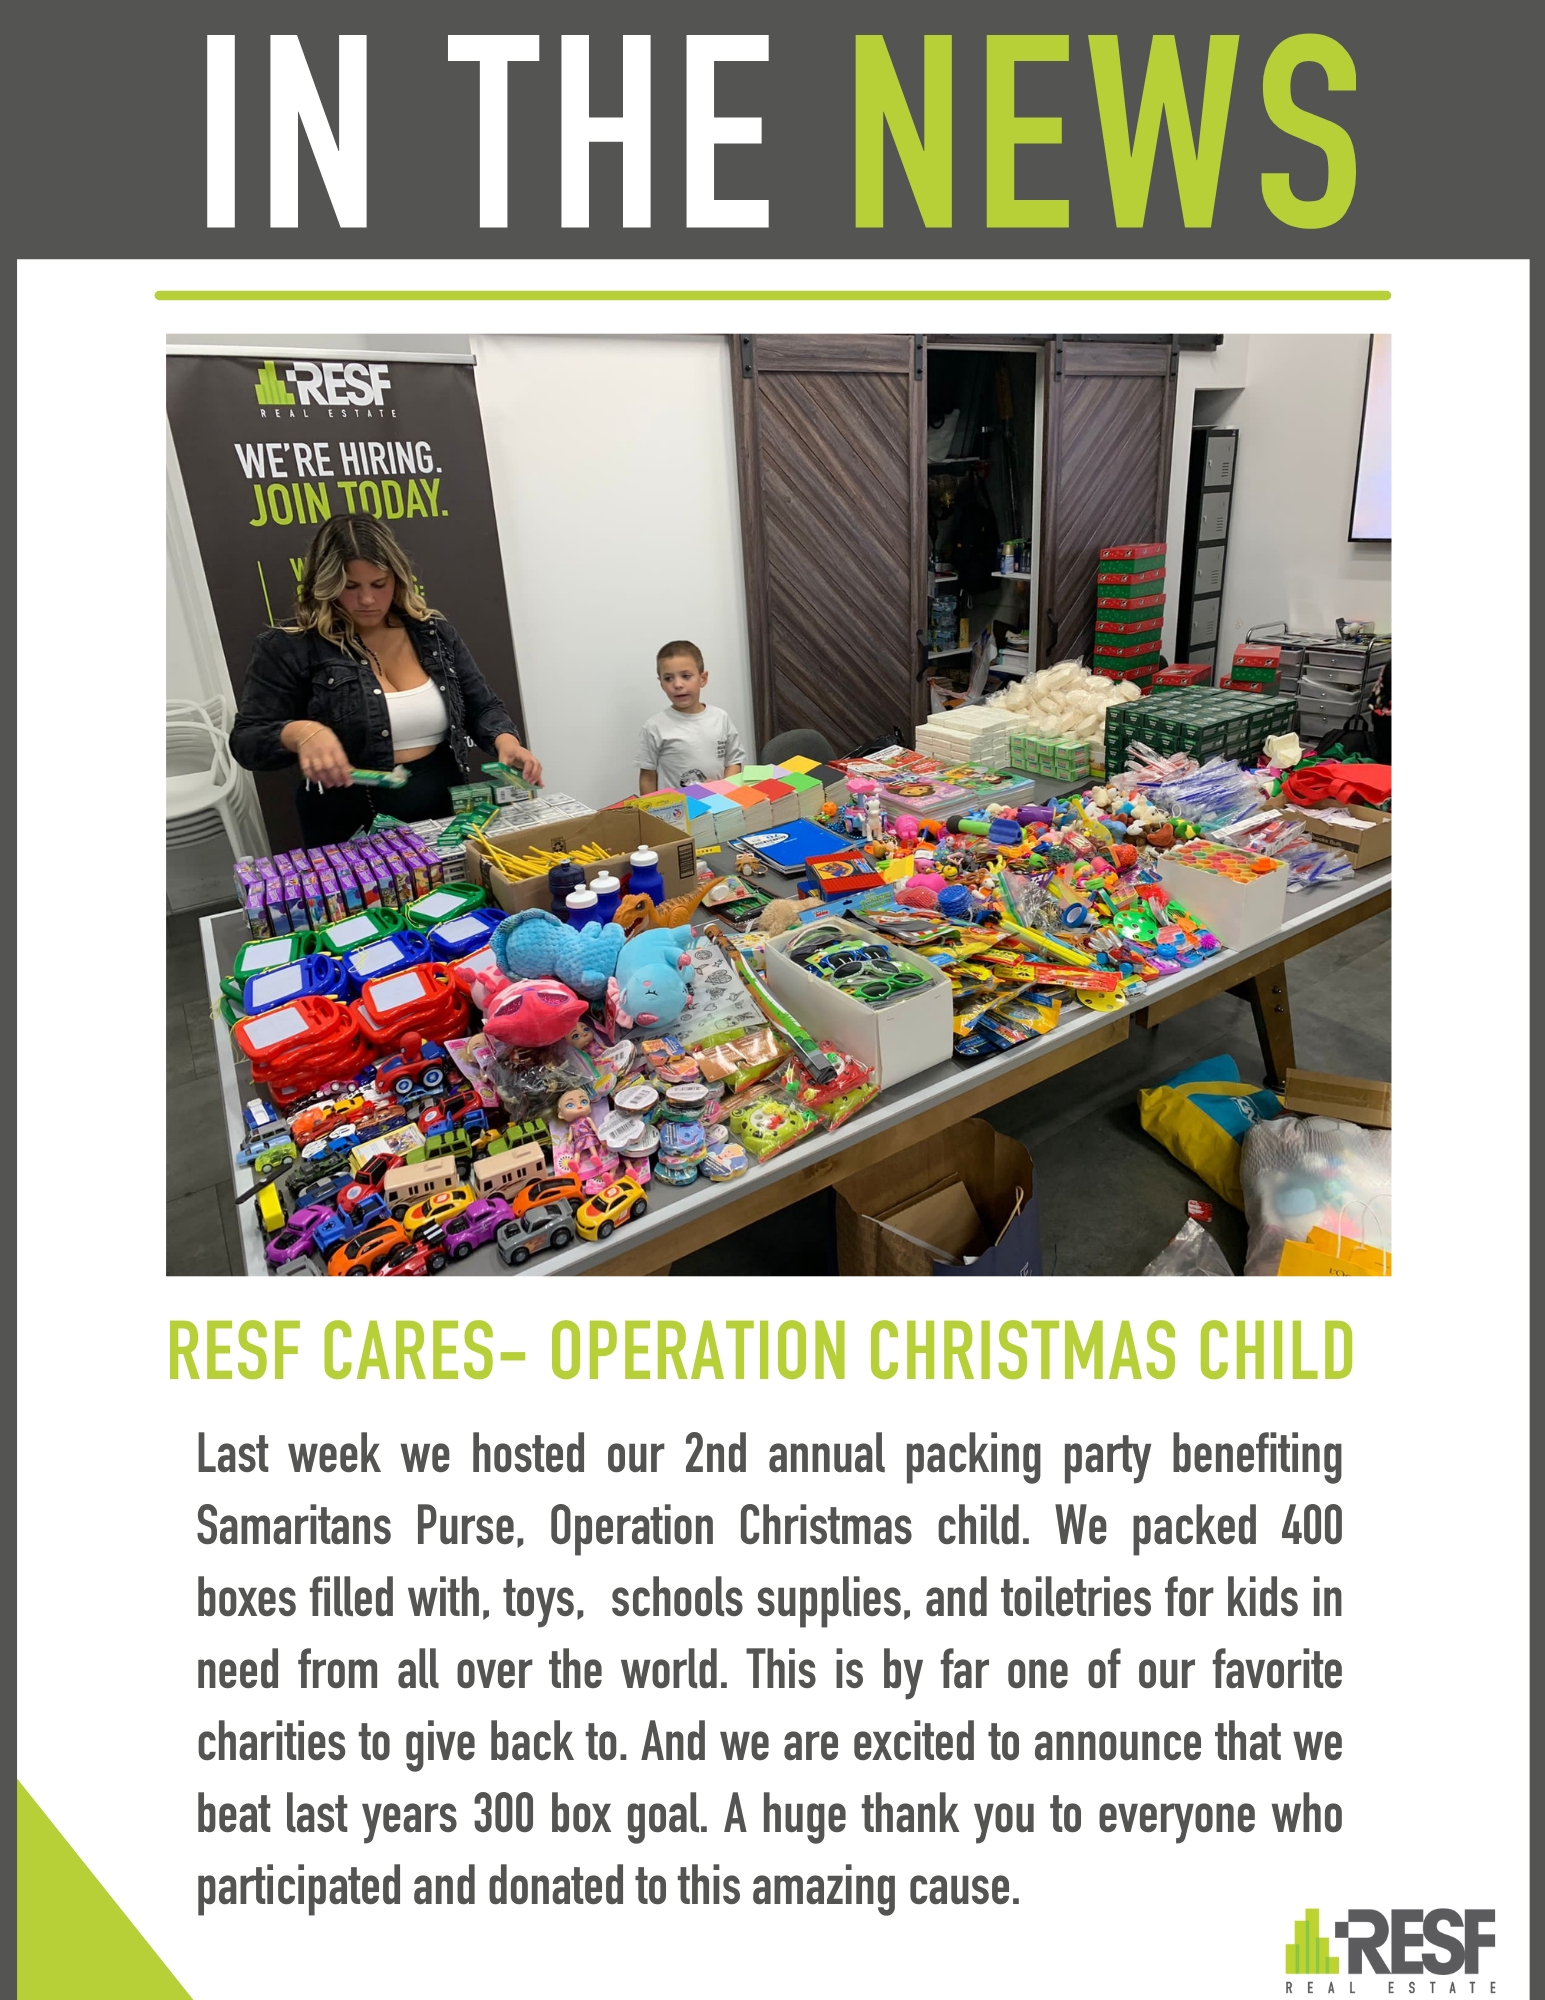 RESF CARES- Operation Christmas child